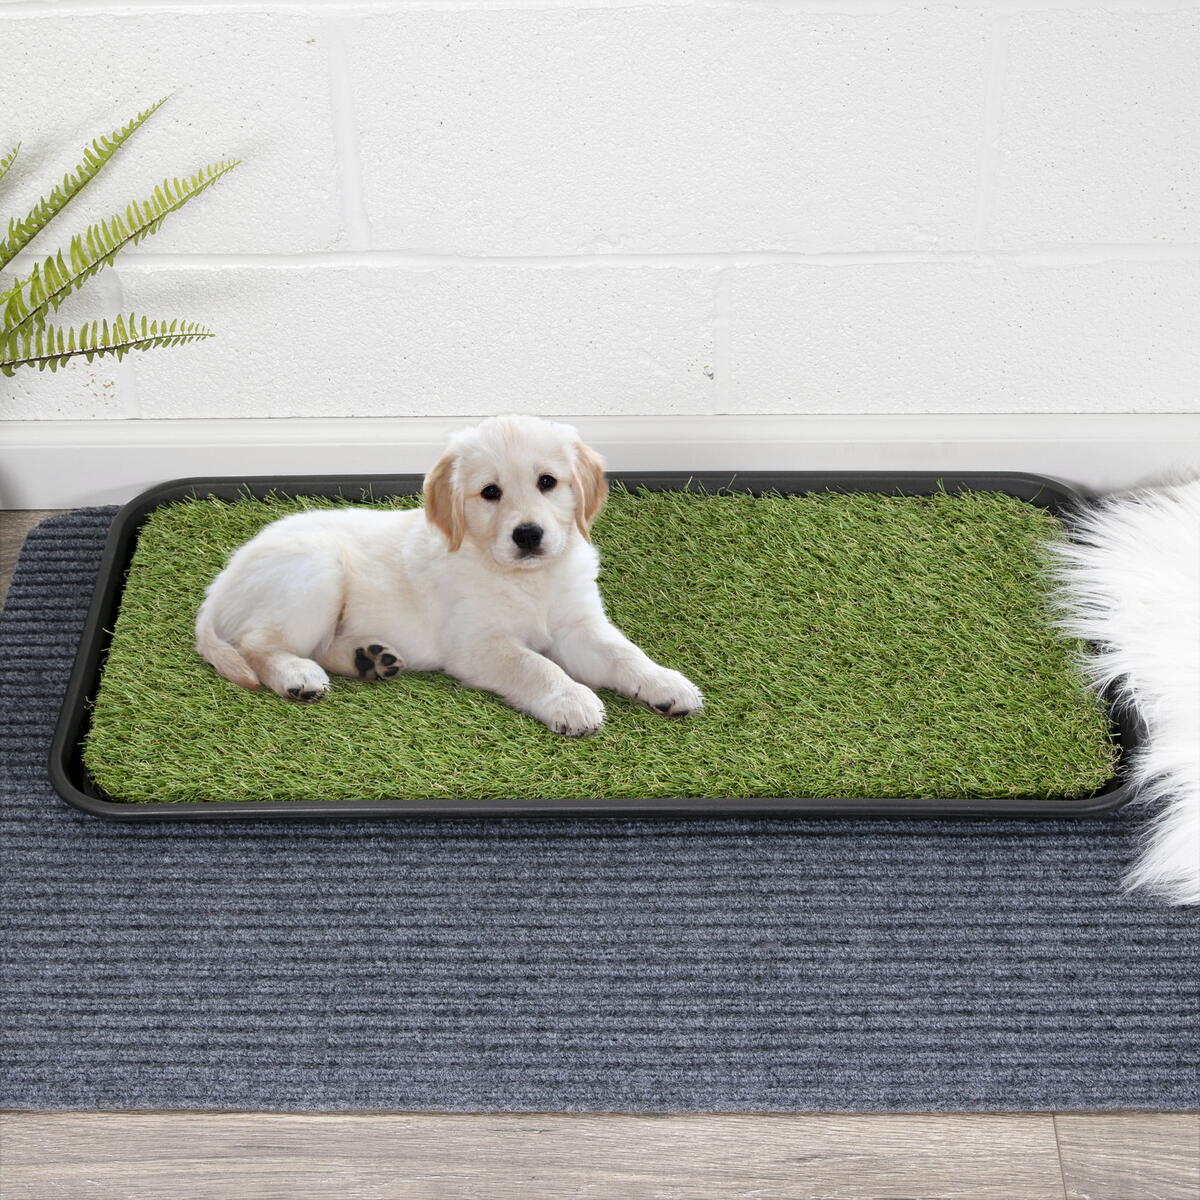 How To Train A Puppy To Pee On A Grass Pad